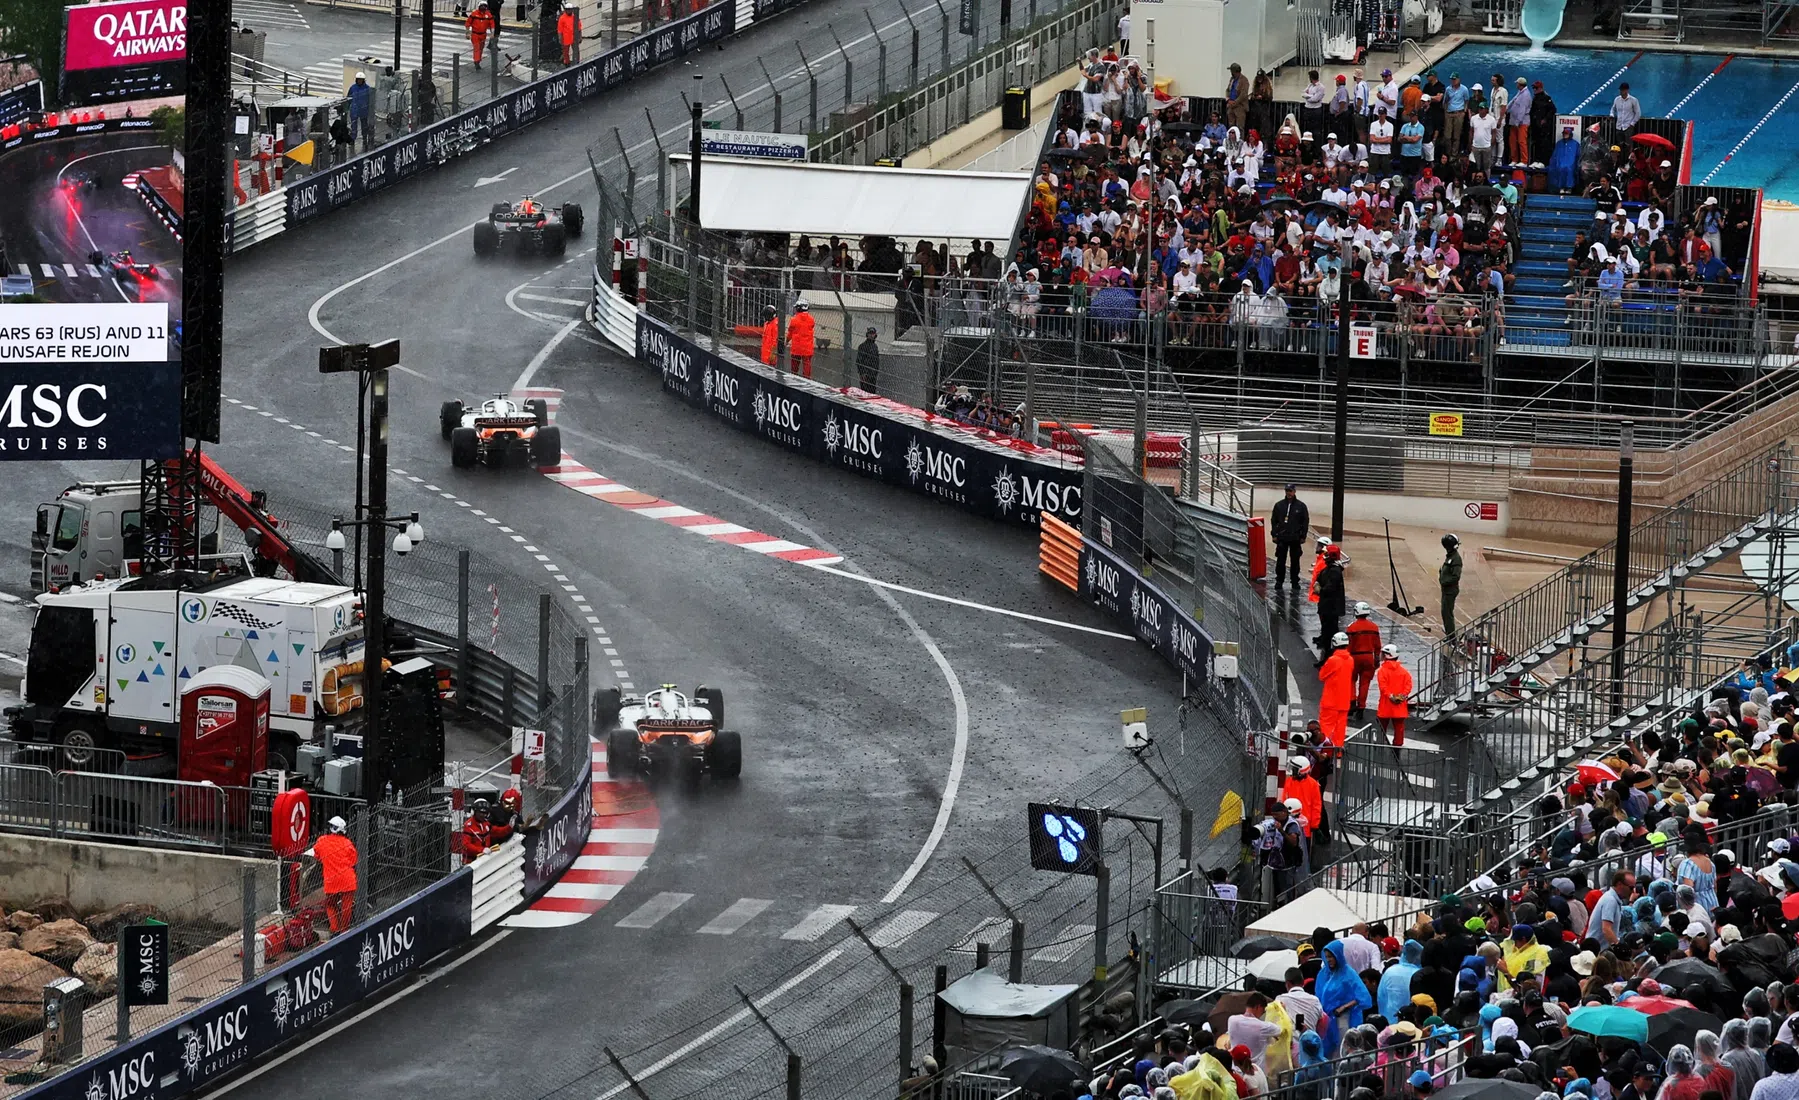 Monaco Grand Prix must pay more money to hold race